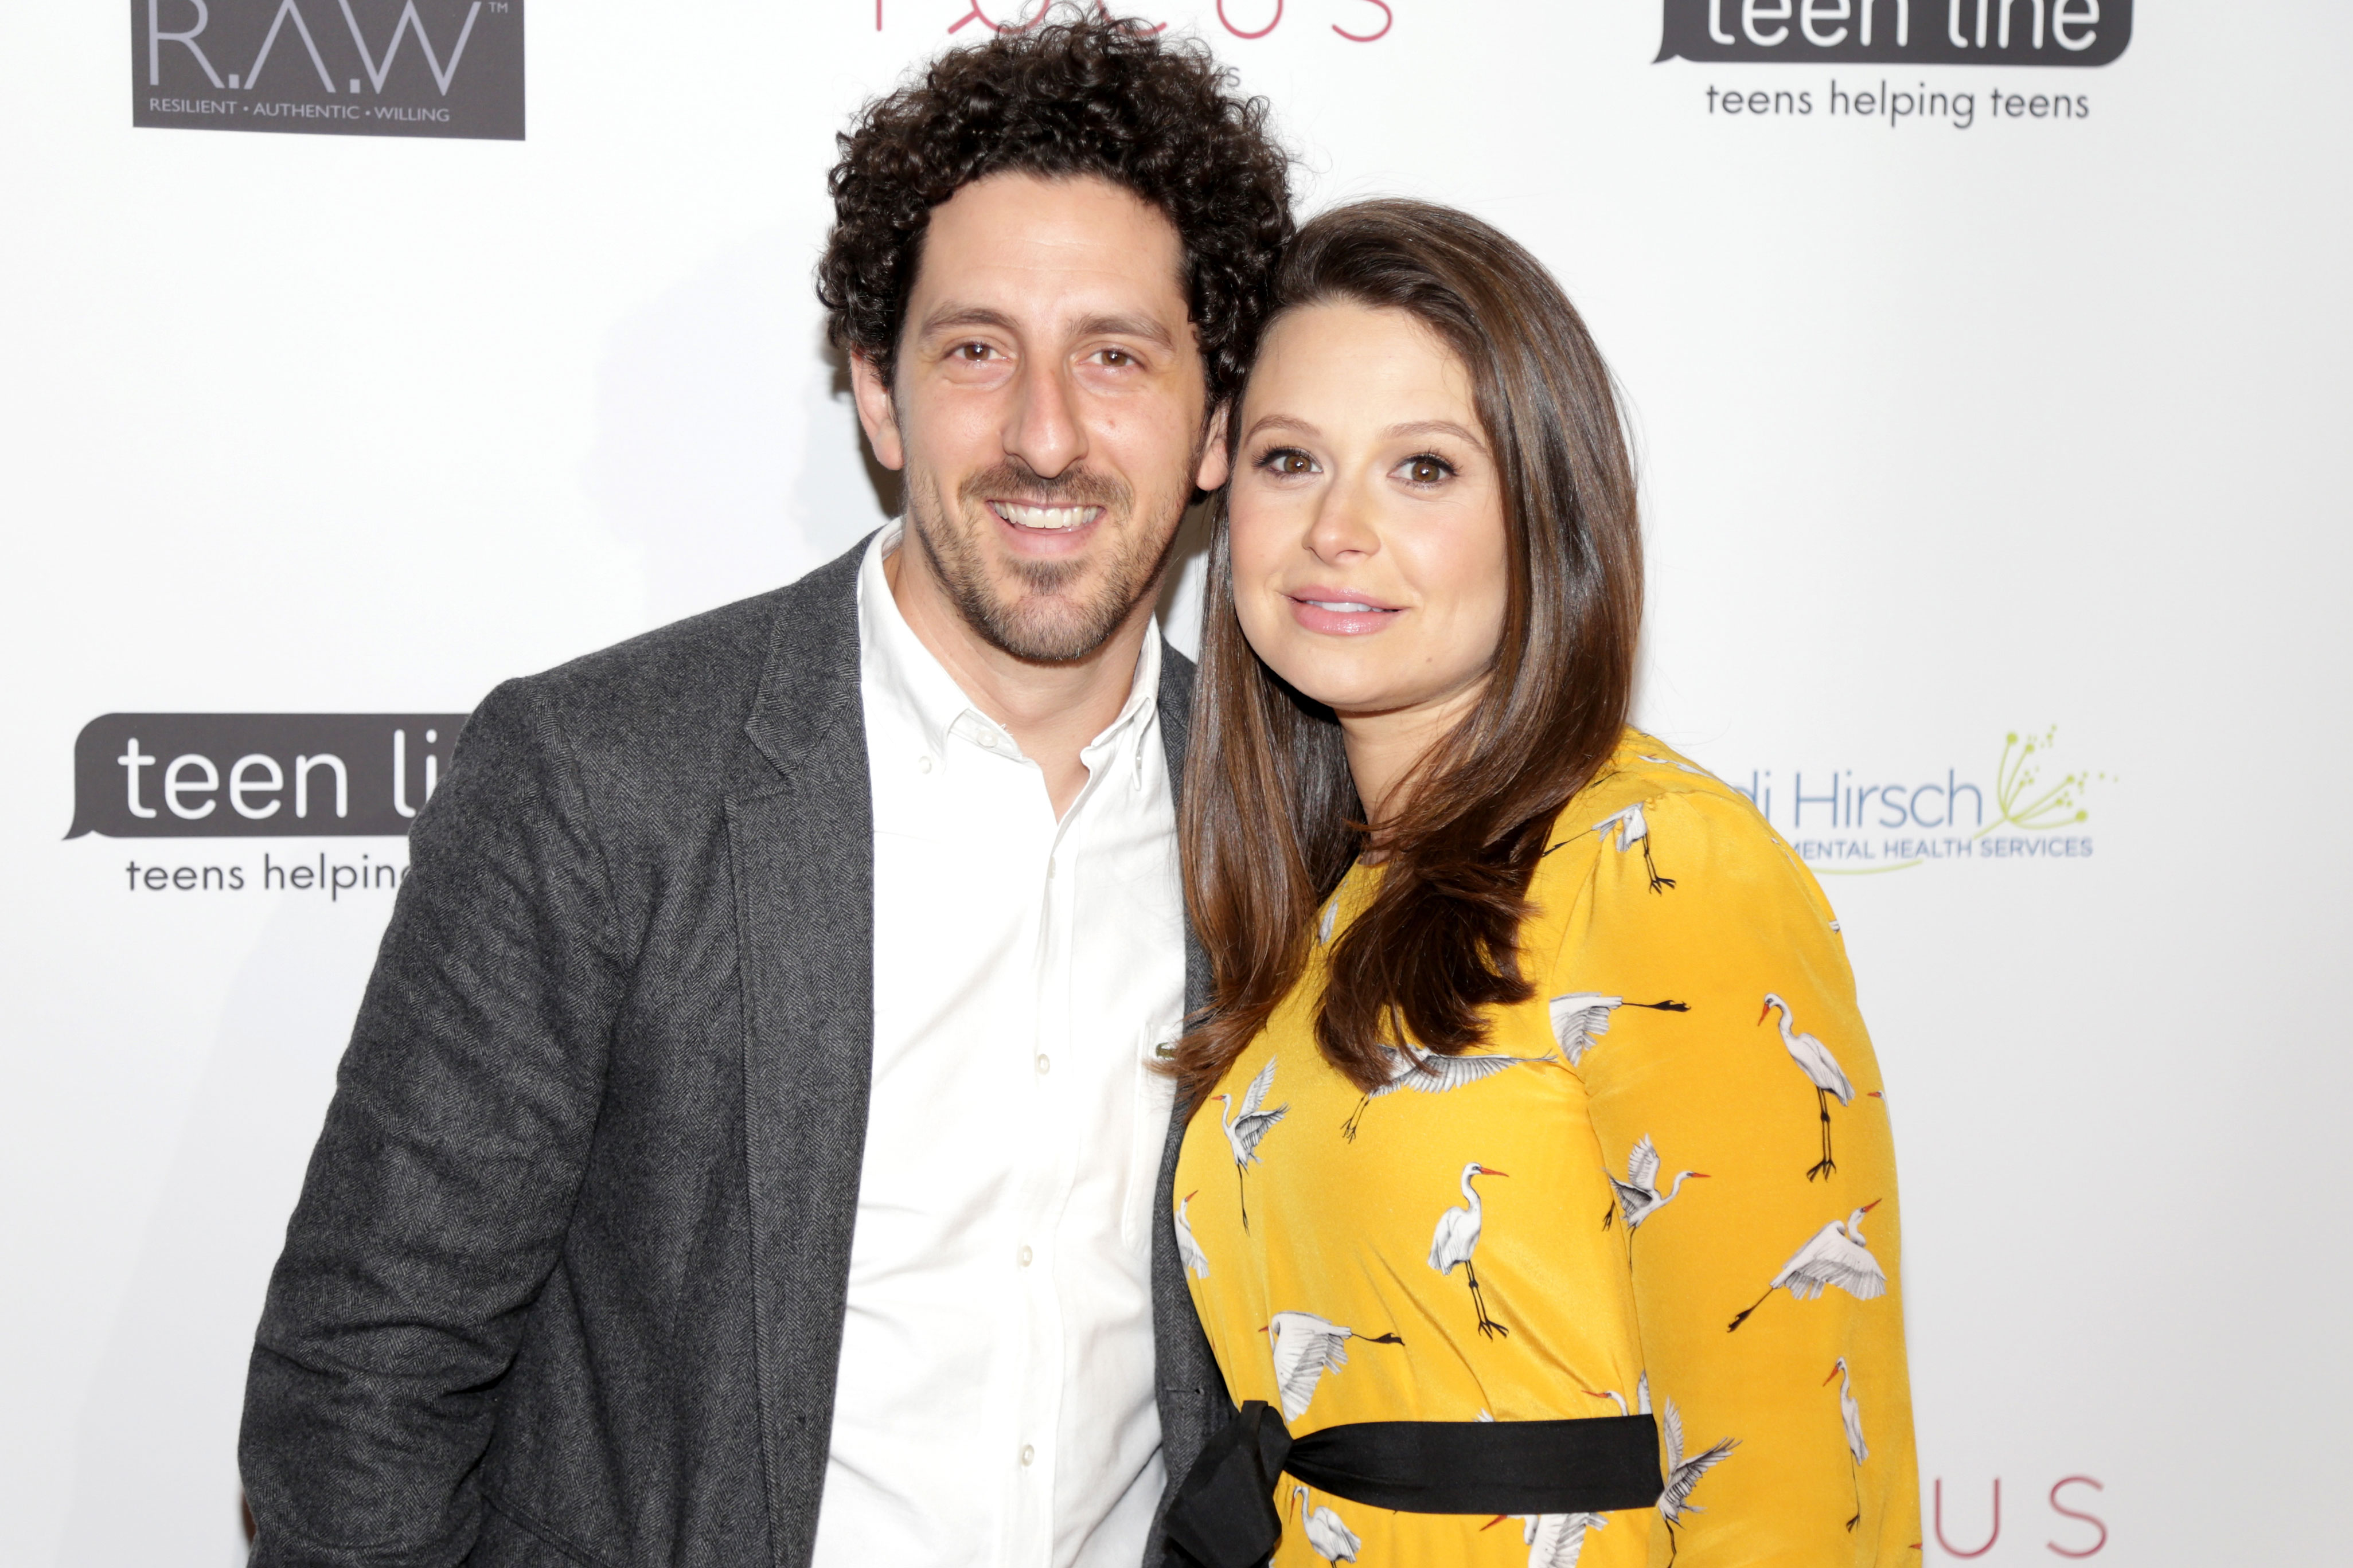 ashton rounds share katie lowes nude photos